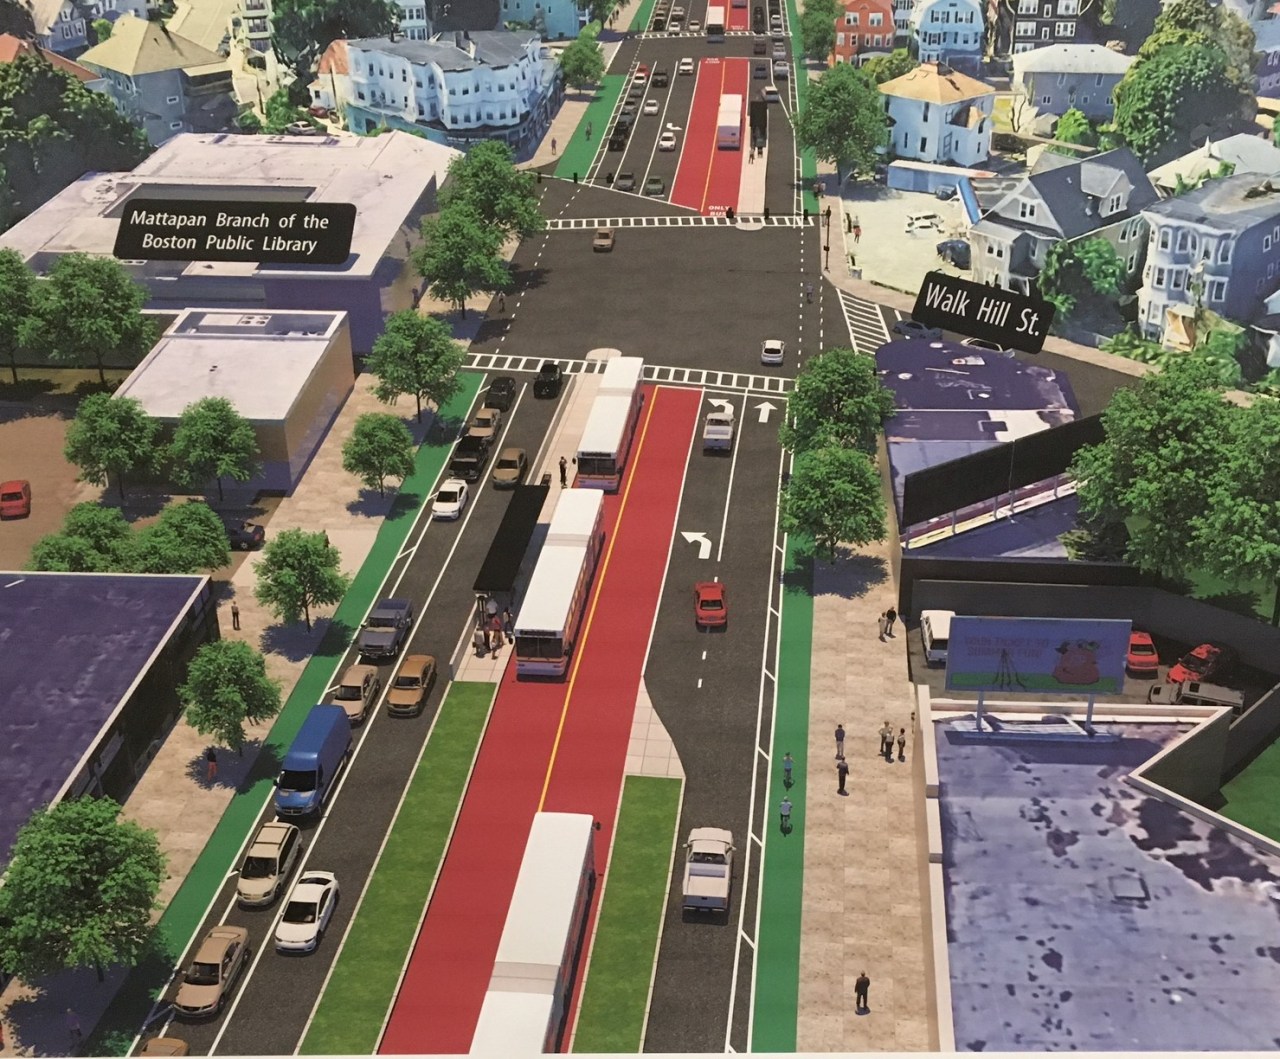 A City of Boston rendering illustrates the center-running bus lane concept for Blue Hill Avenue near Walk Hill Street. Under the plan, bus lanes and dedicated stations would run in the middle of the street, away from double-parked cars and turning vehicles. Pedestrian crossings would also be significantly shorter. Courtesy of the City of Boston.